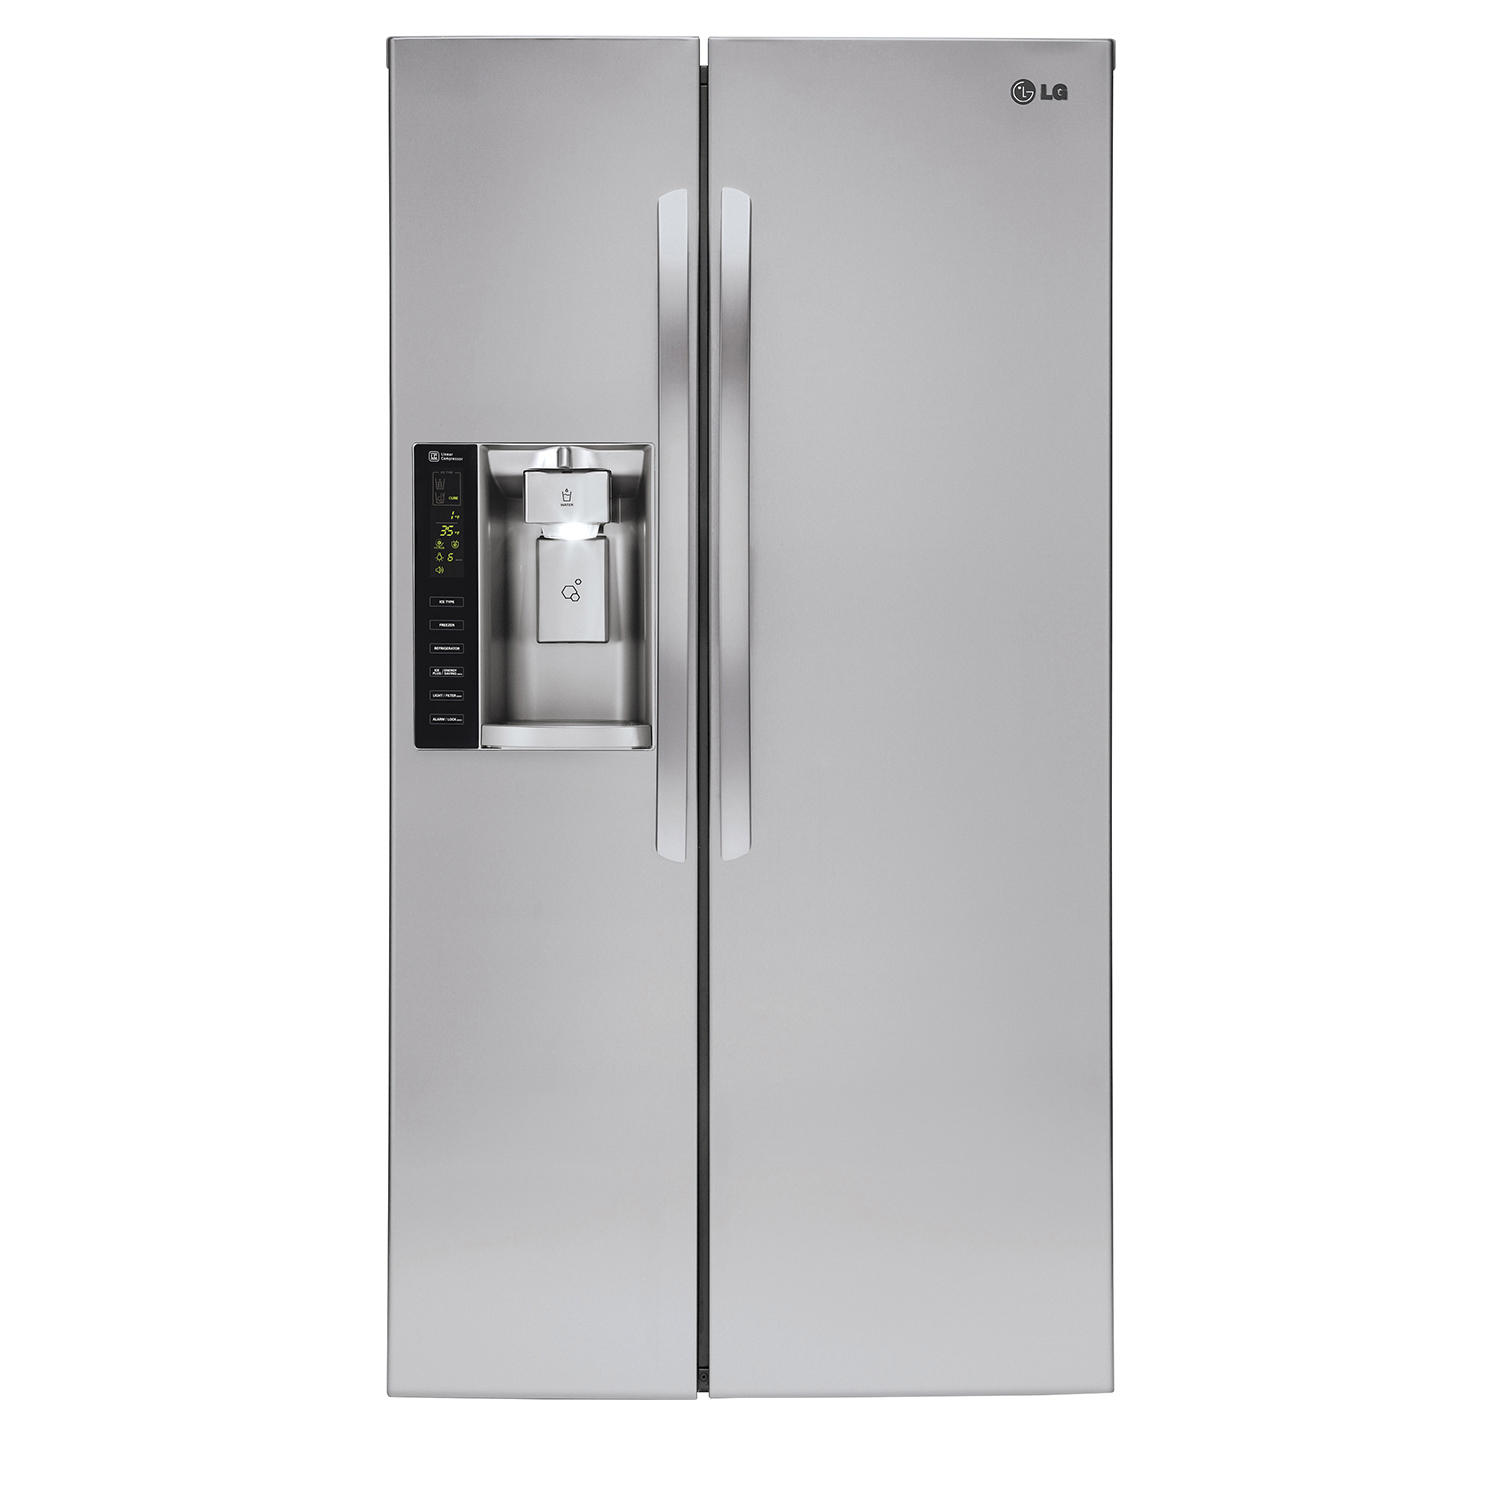 LG LSXS26326S 26 cu. ft. Ultra-Capacity Side-by-Side Refrigerator with Ice and Water Dispenser